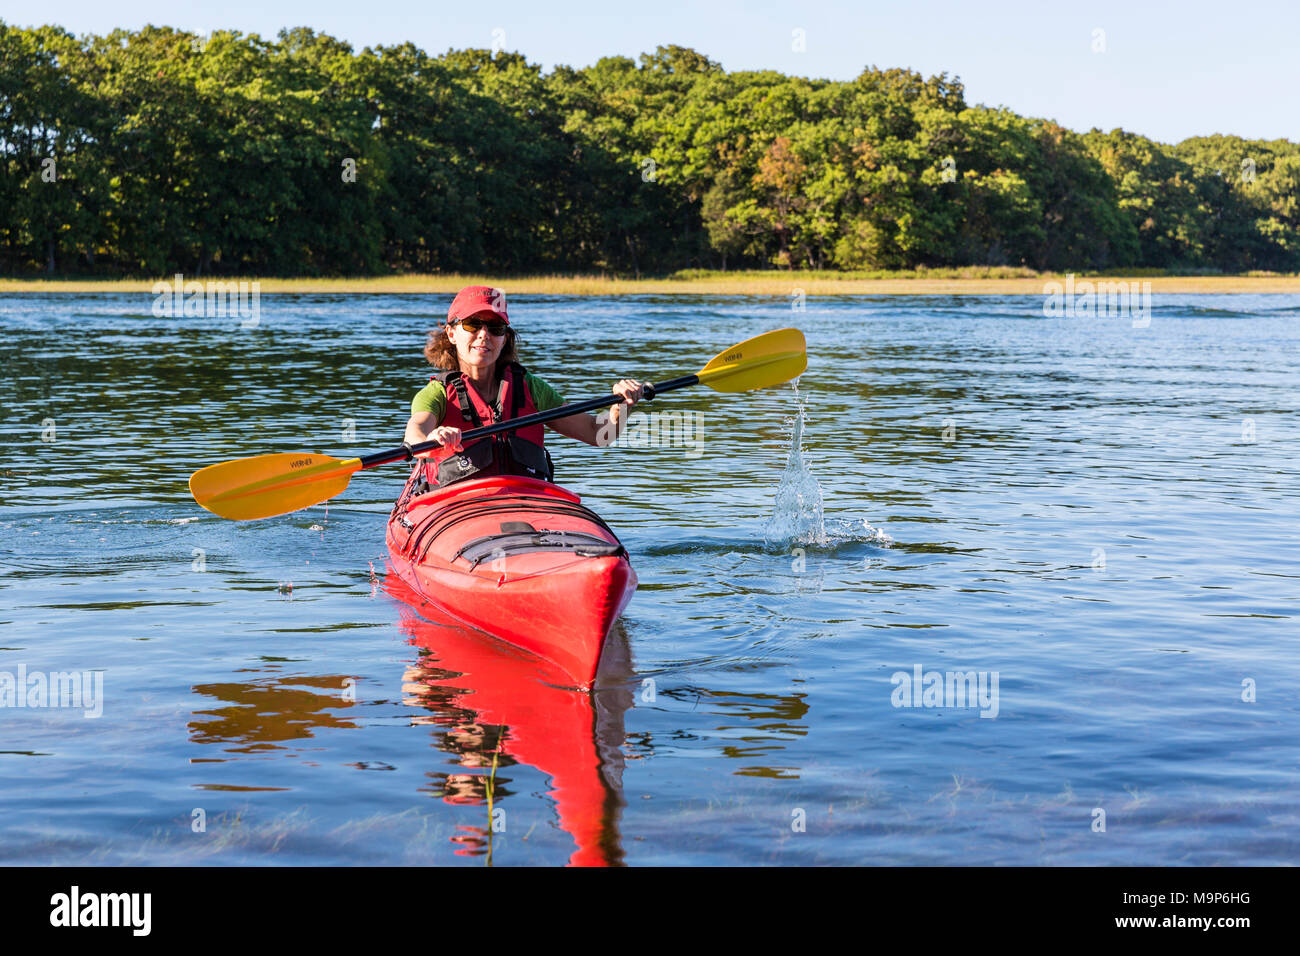 Woman in kayak on Essex River at Cox Reservation in Essex, Massachusetts Stock Photo